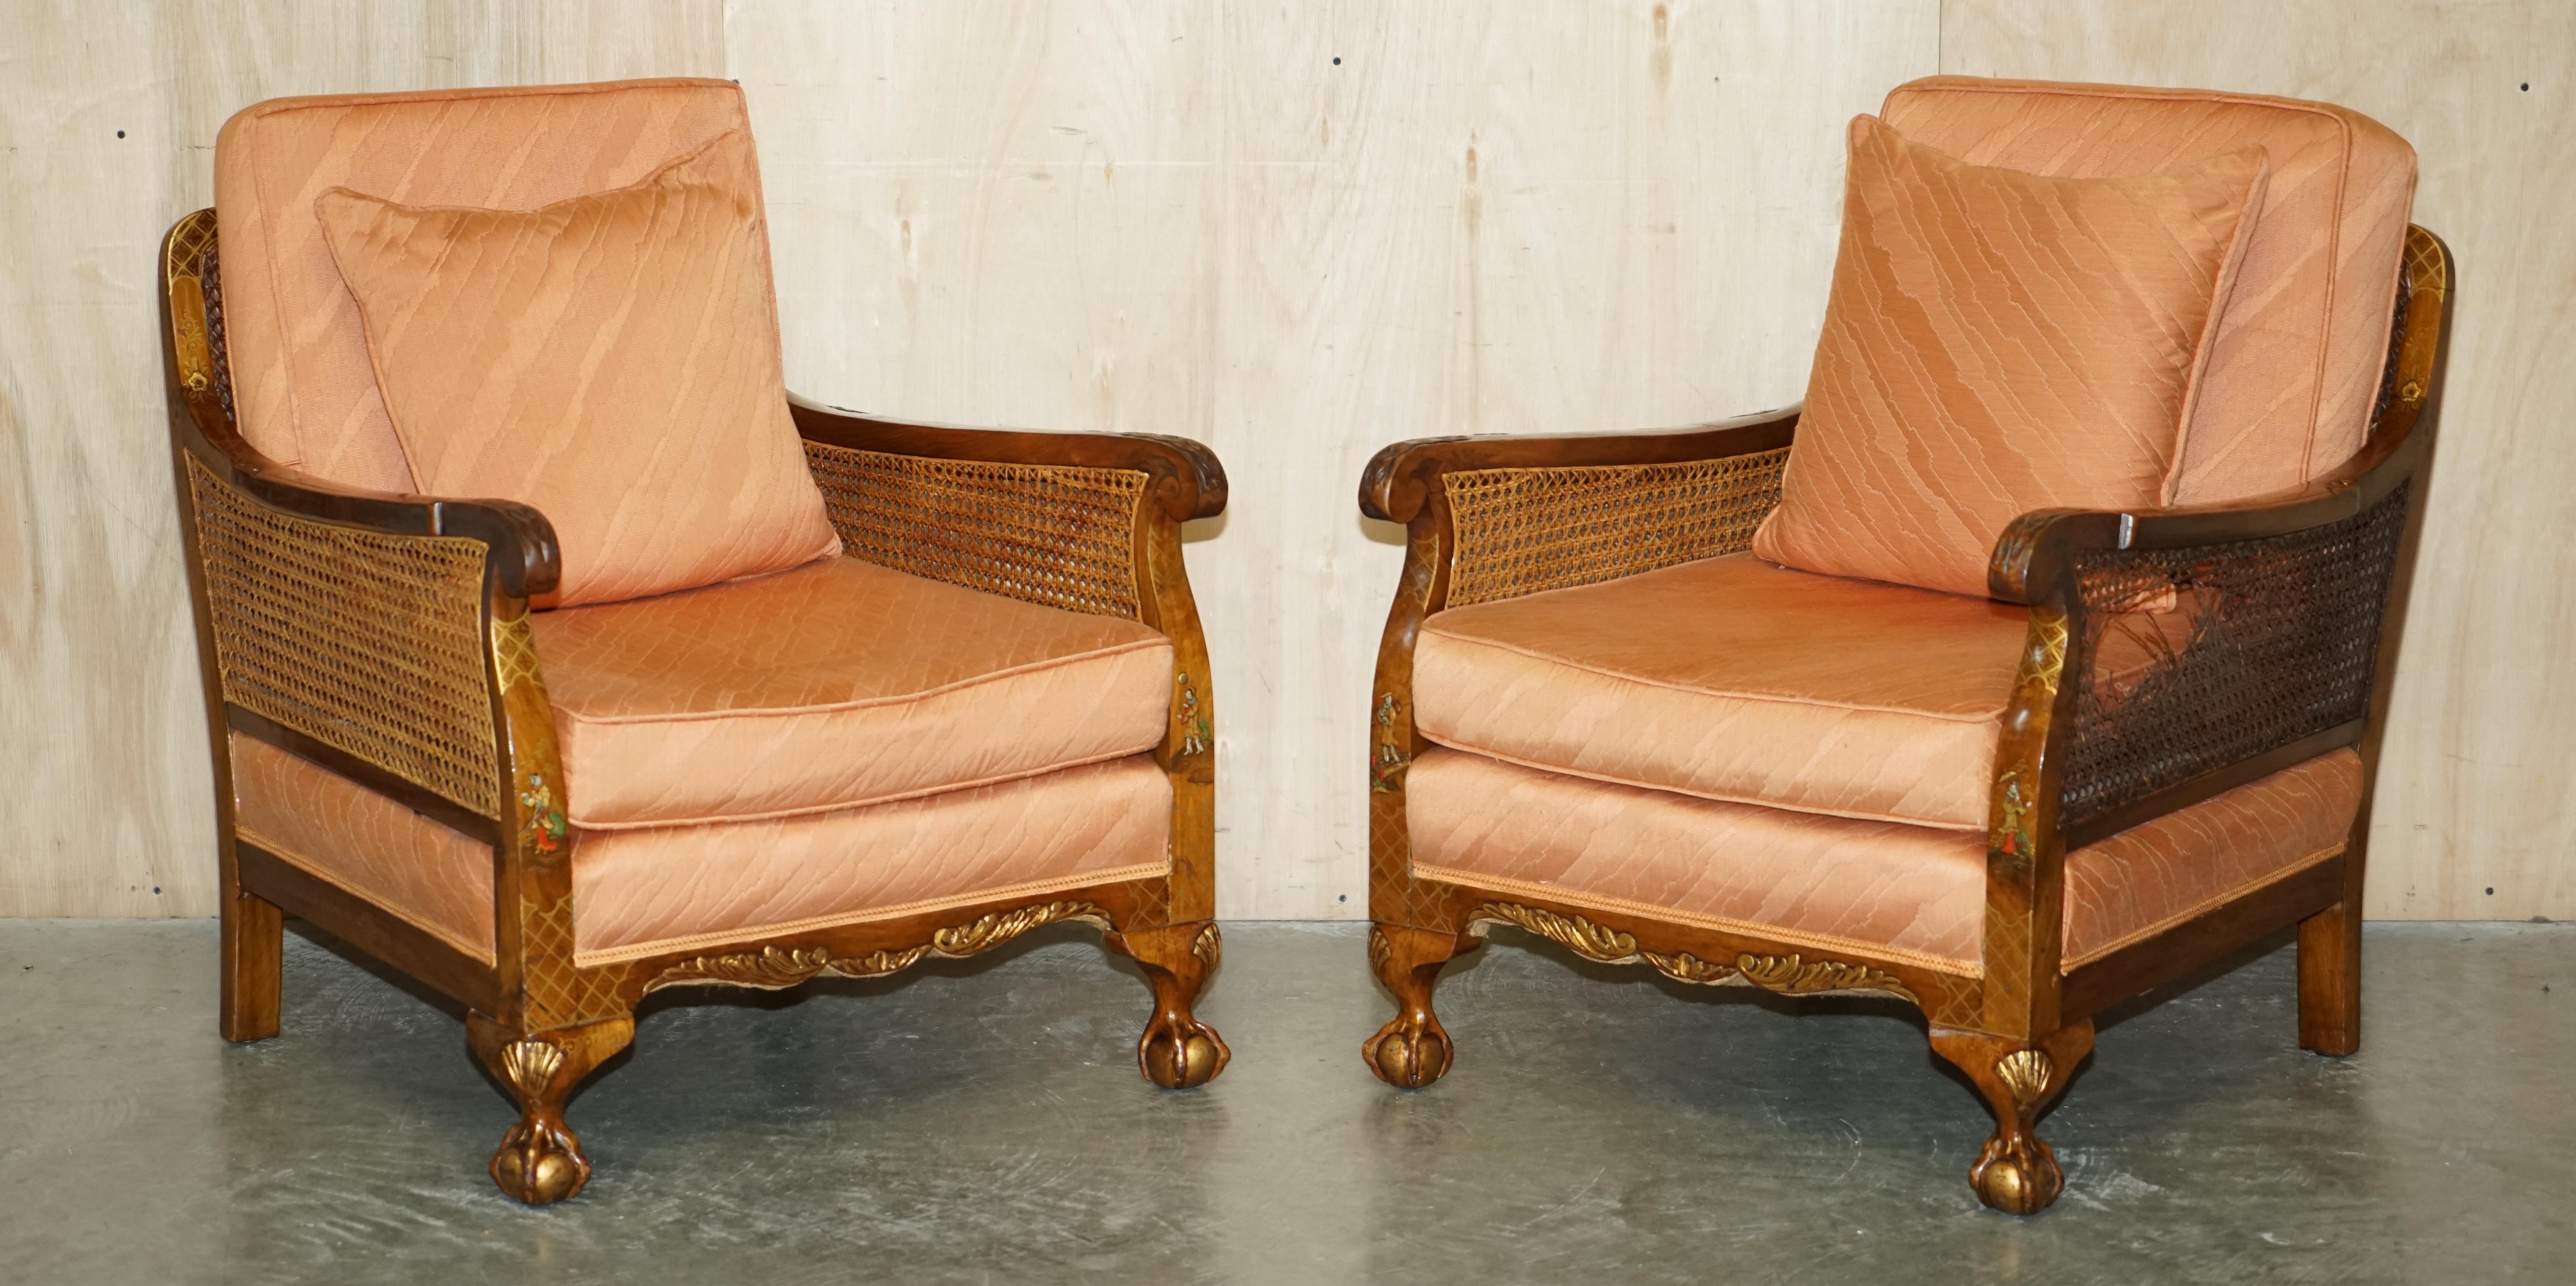 1920's WALNUT & CHINOISERIE 3 PIECE BERGERE SOFA ARMCHAIR SUITE FOR RESTORATION For Sale 6